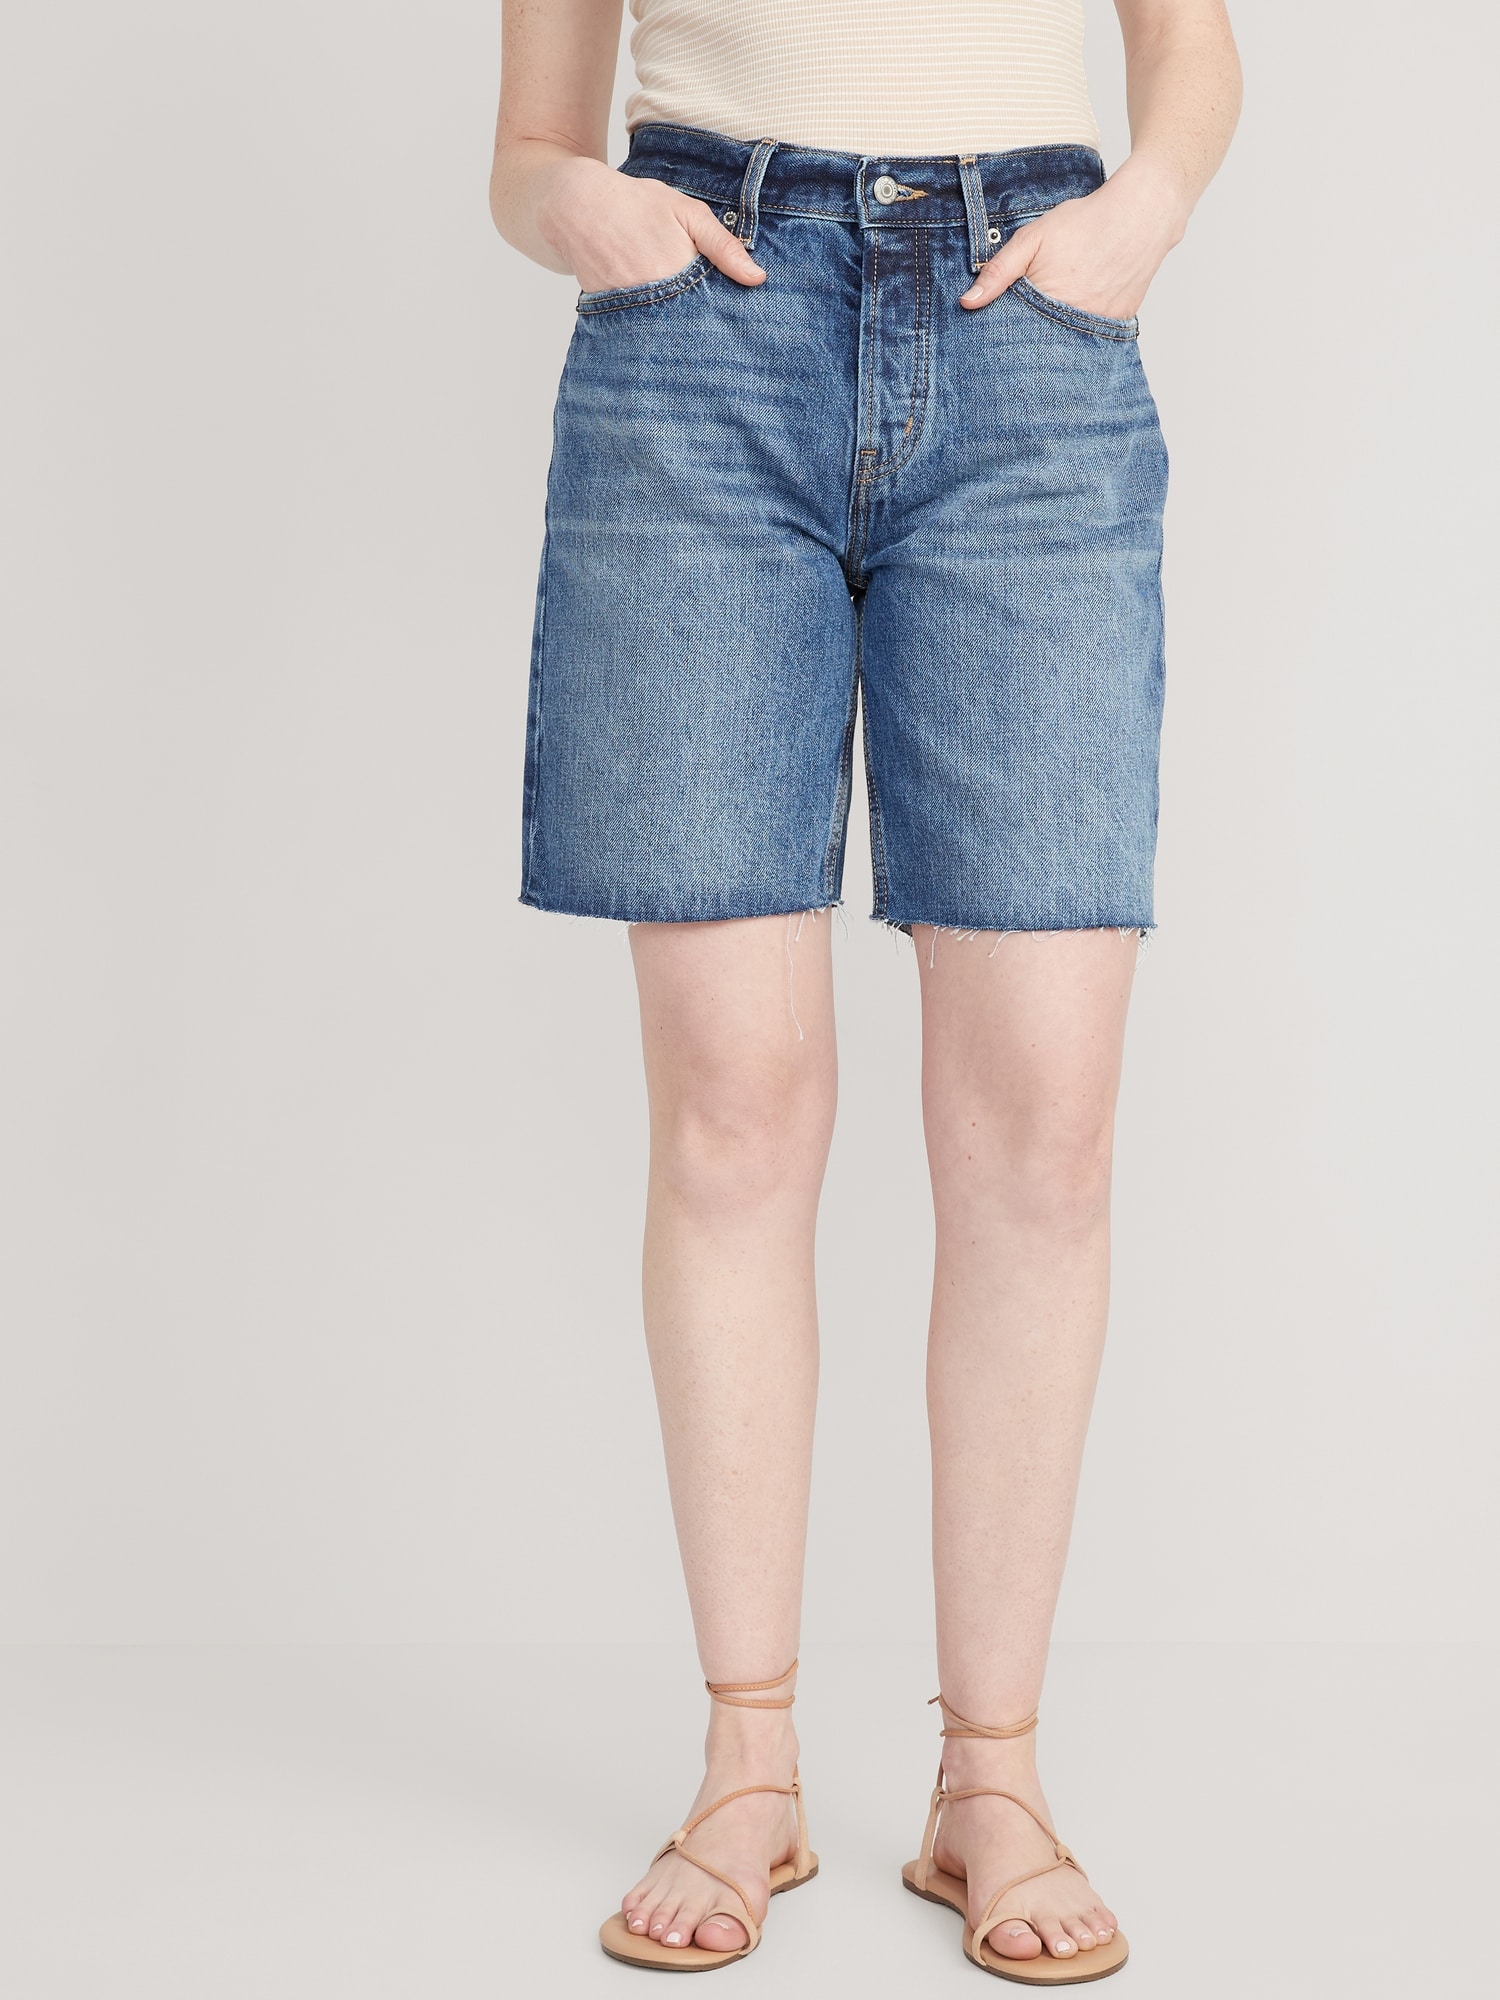 Old Navy High-Waisted Slouchy Button-Fly Cut-Off Jean Shorts for Women -- 9-inch inseam blue. 1